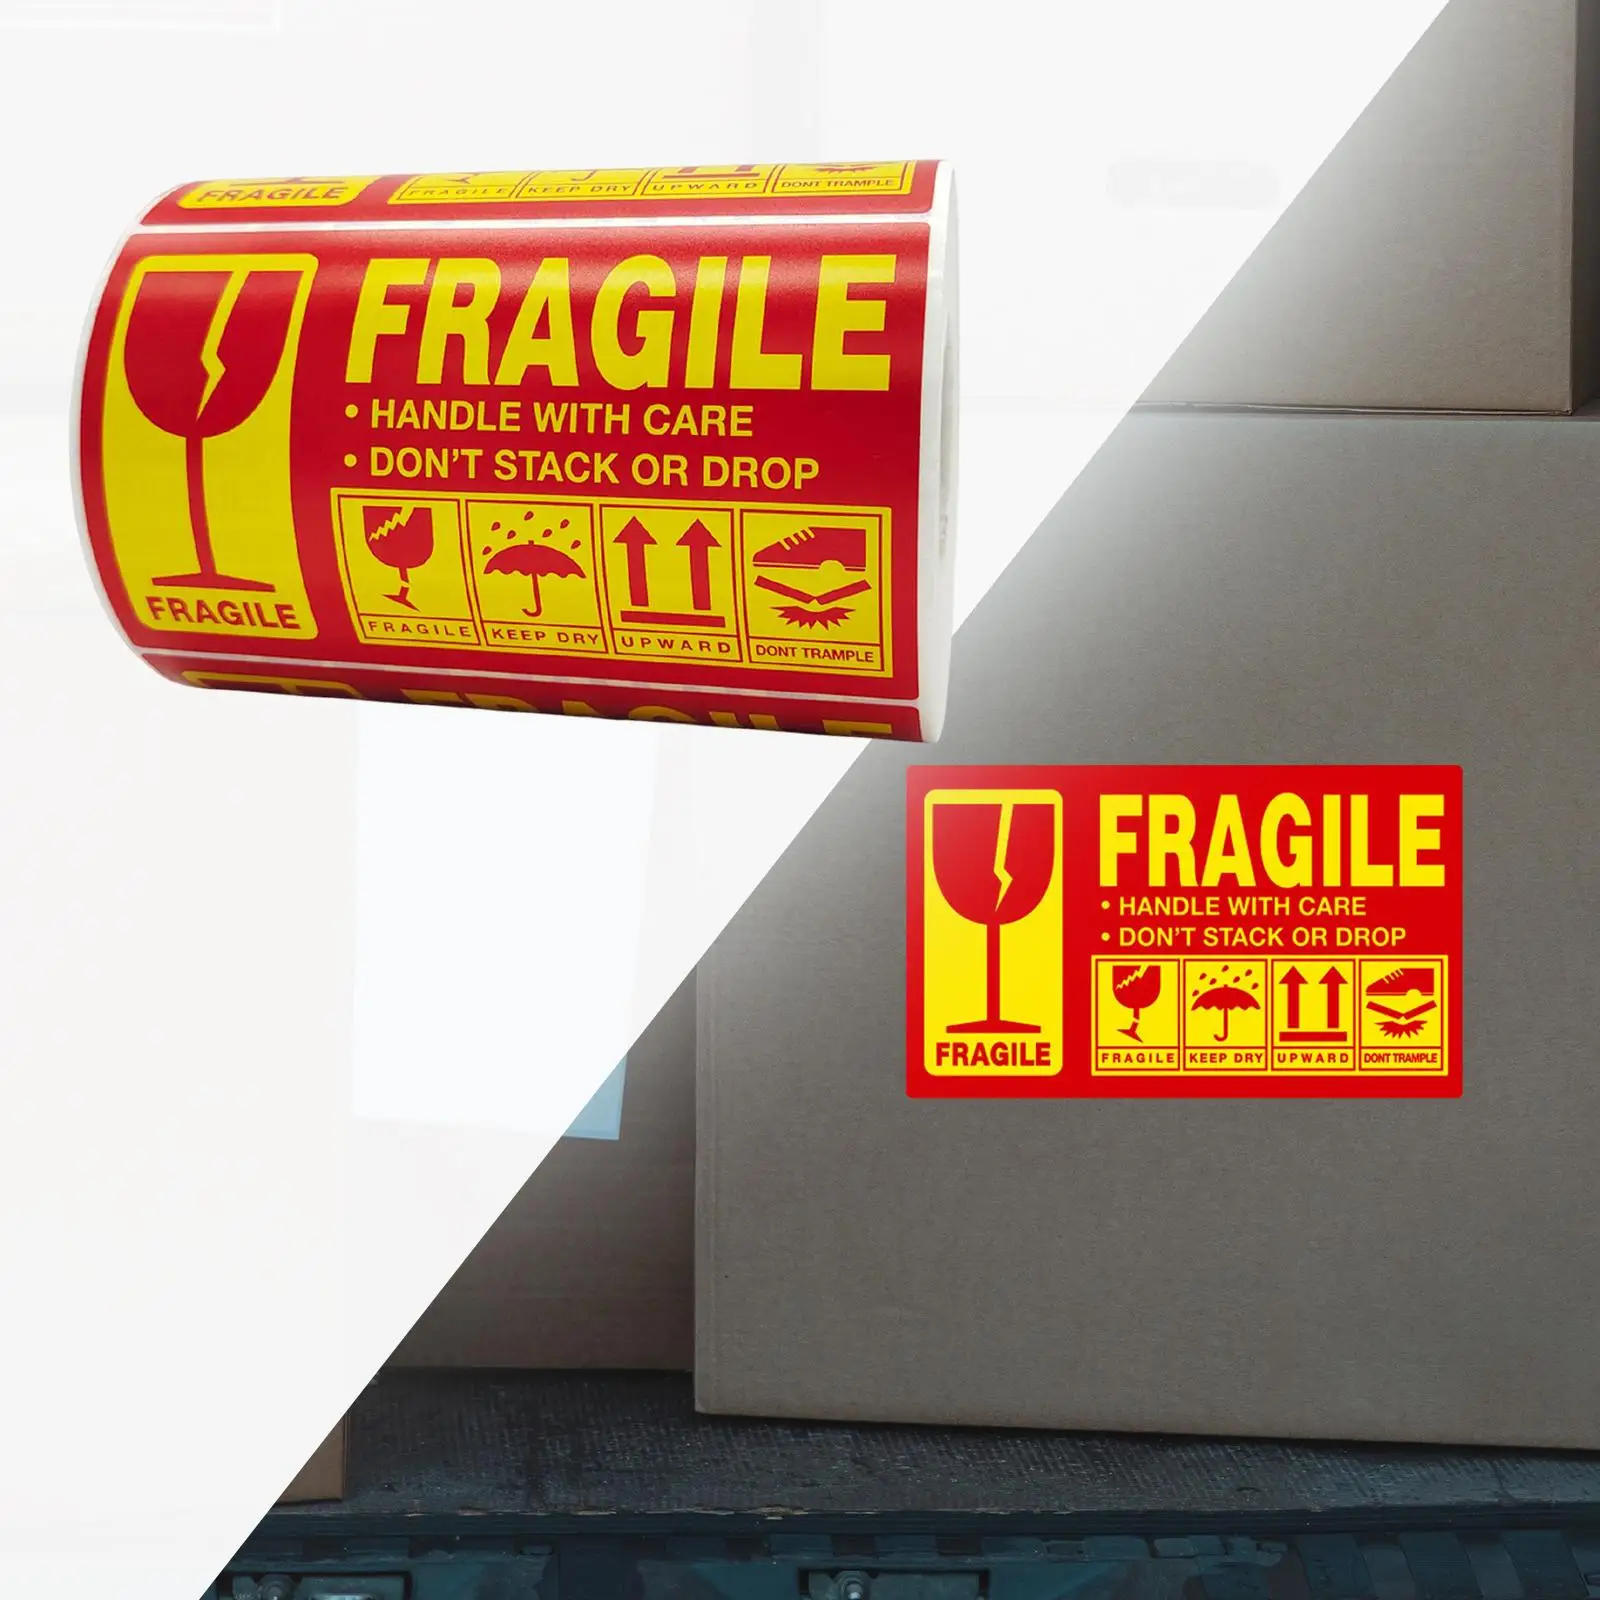 Fragile Handle with Care Packing Tape Sealing Tape for Shipping Box Transportation Mailing Office Carton Box Supplies